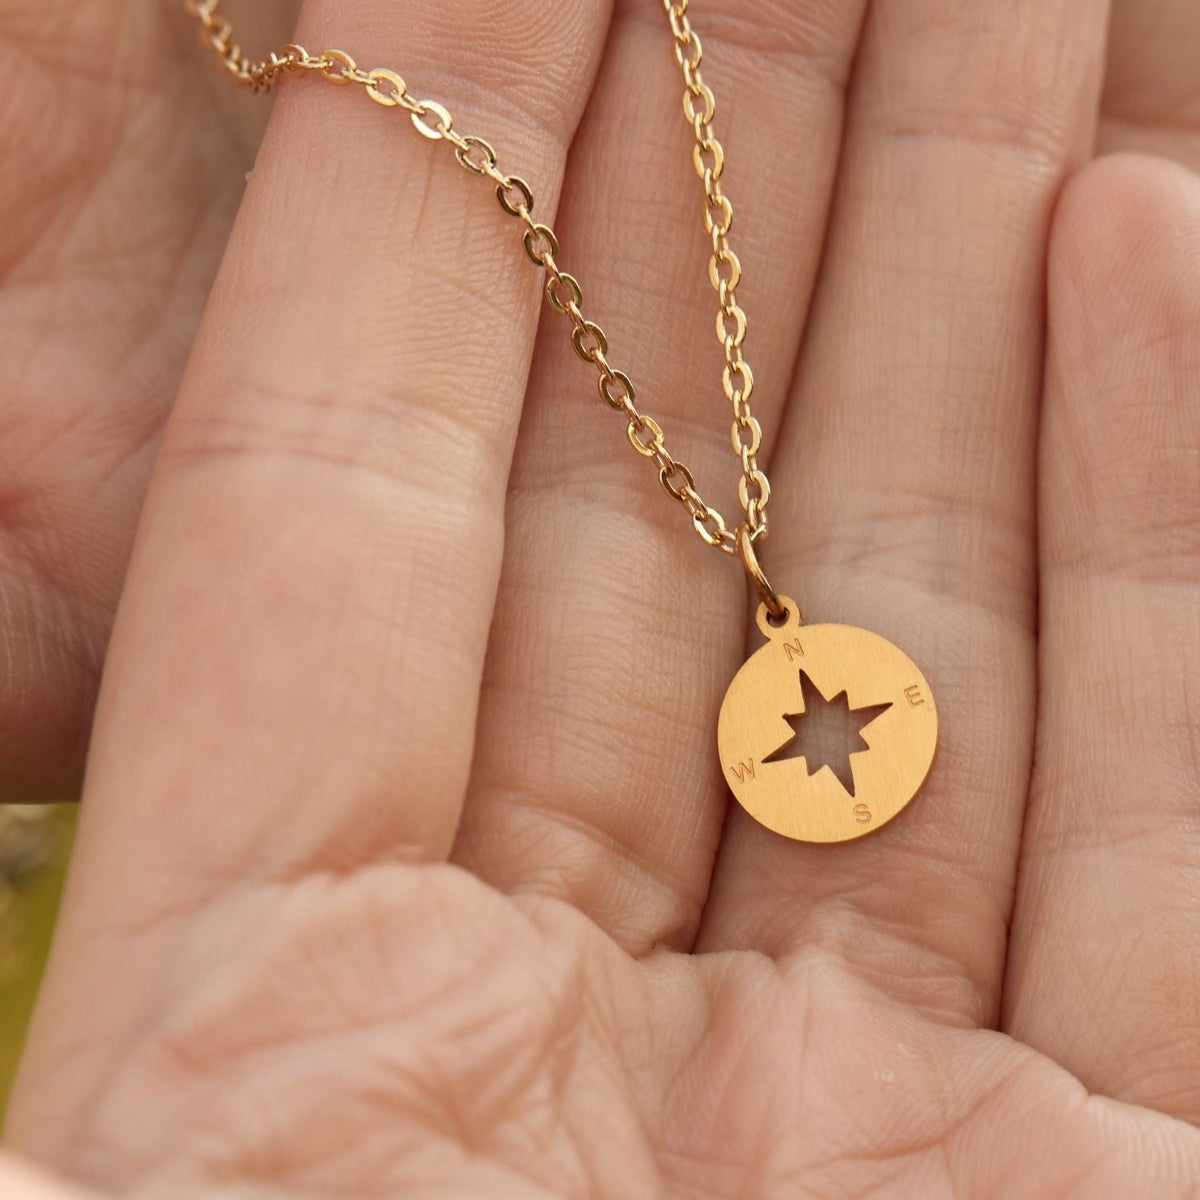 To My Beautiful Daughter | Strength of My Love | Compass Necklace